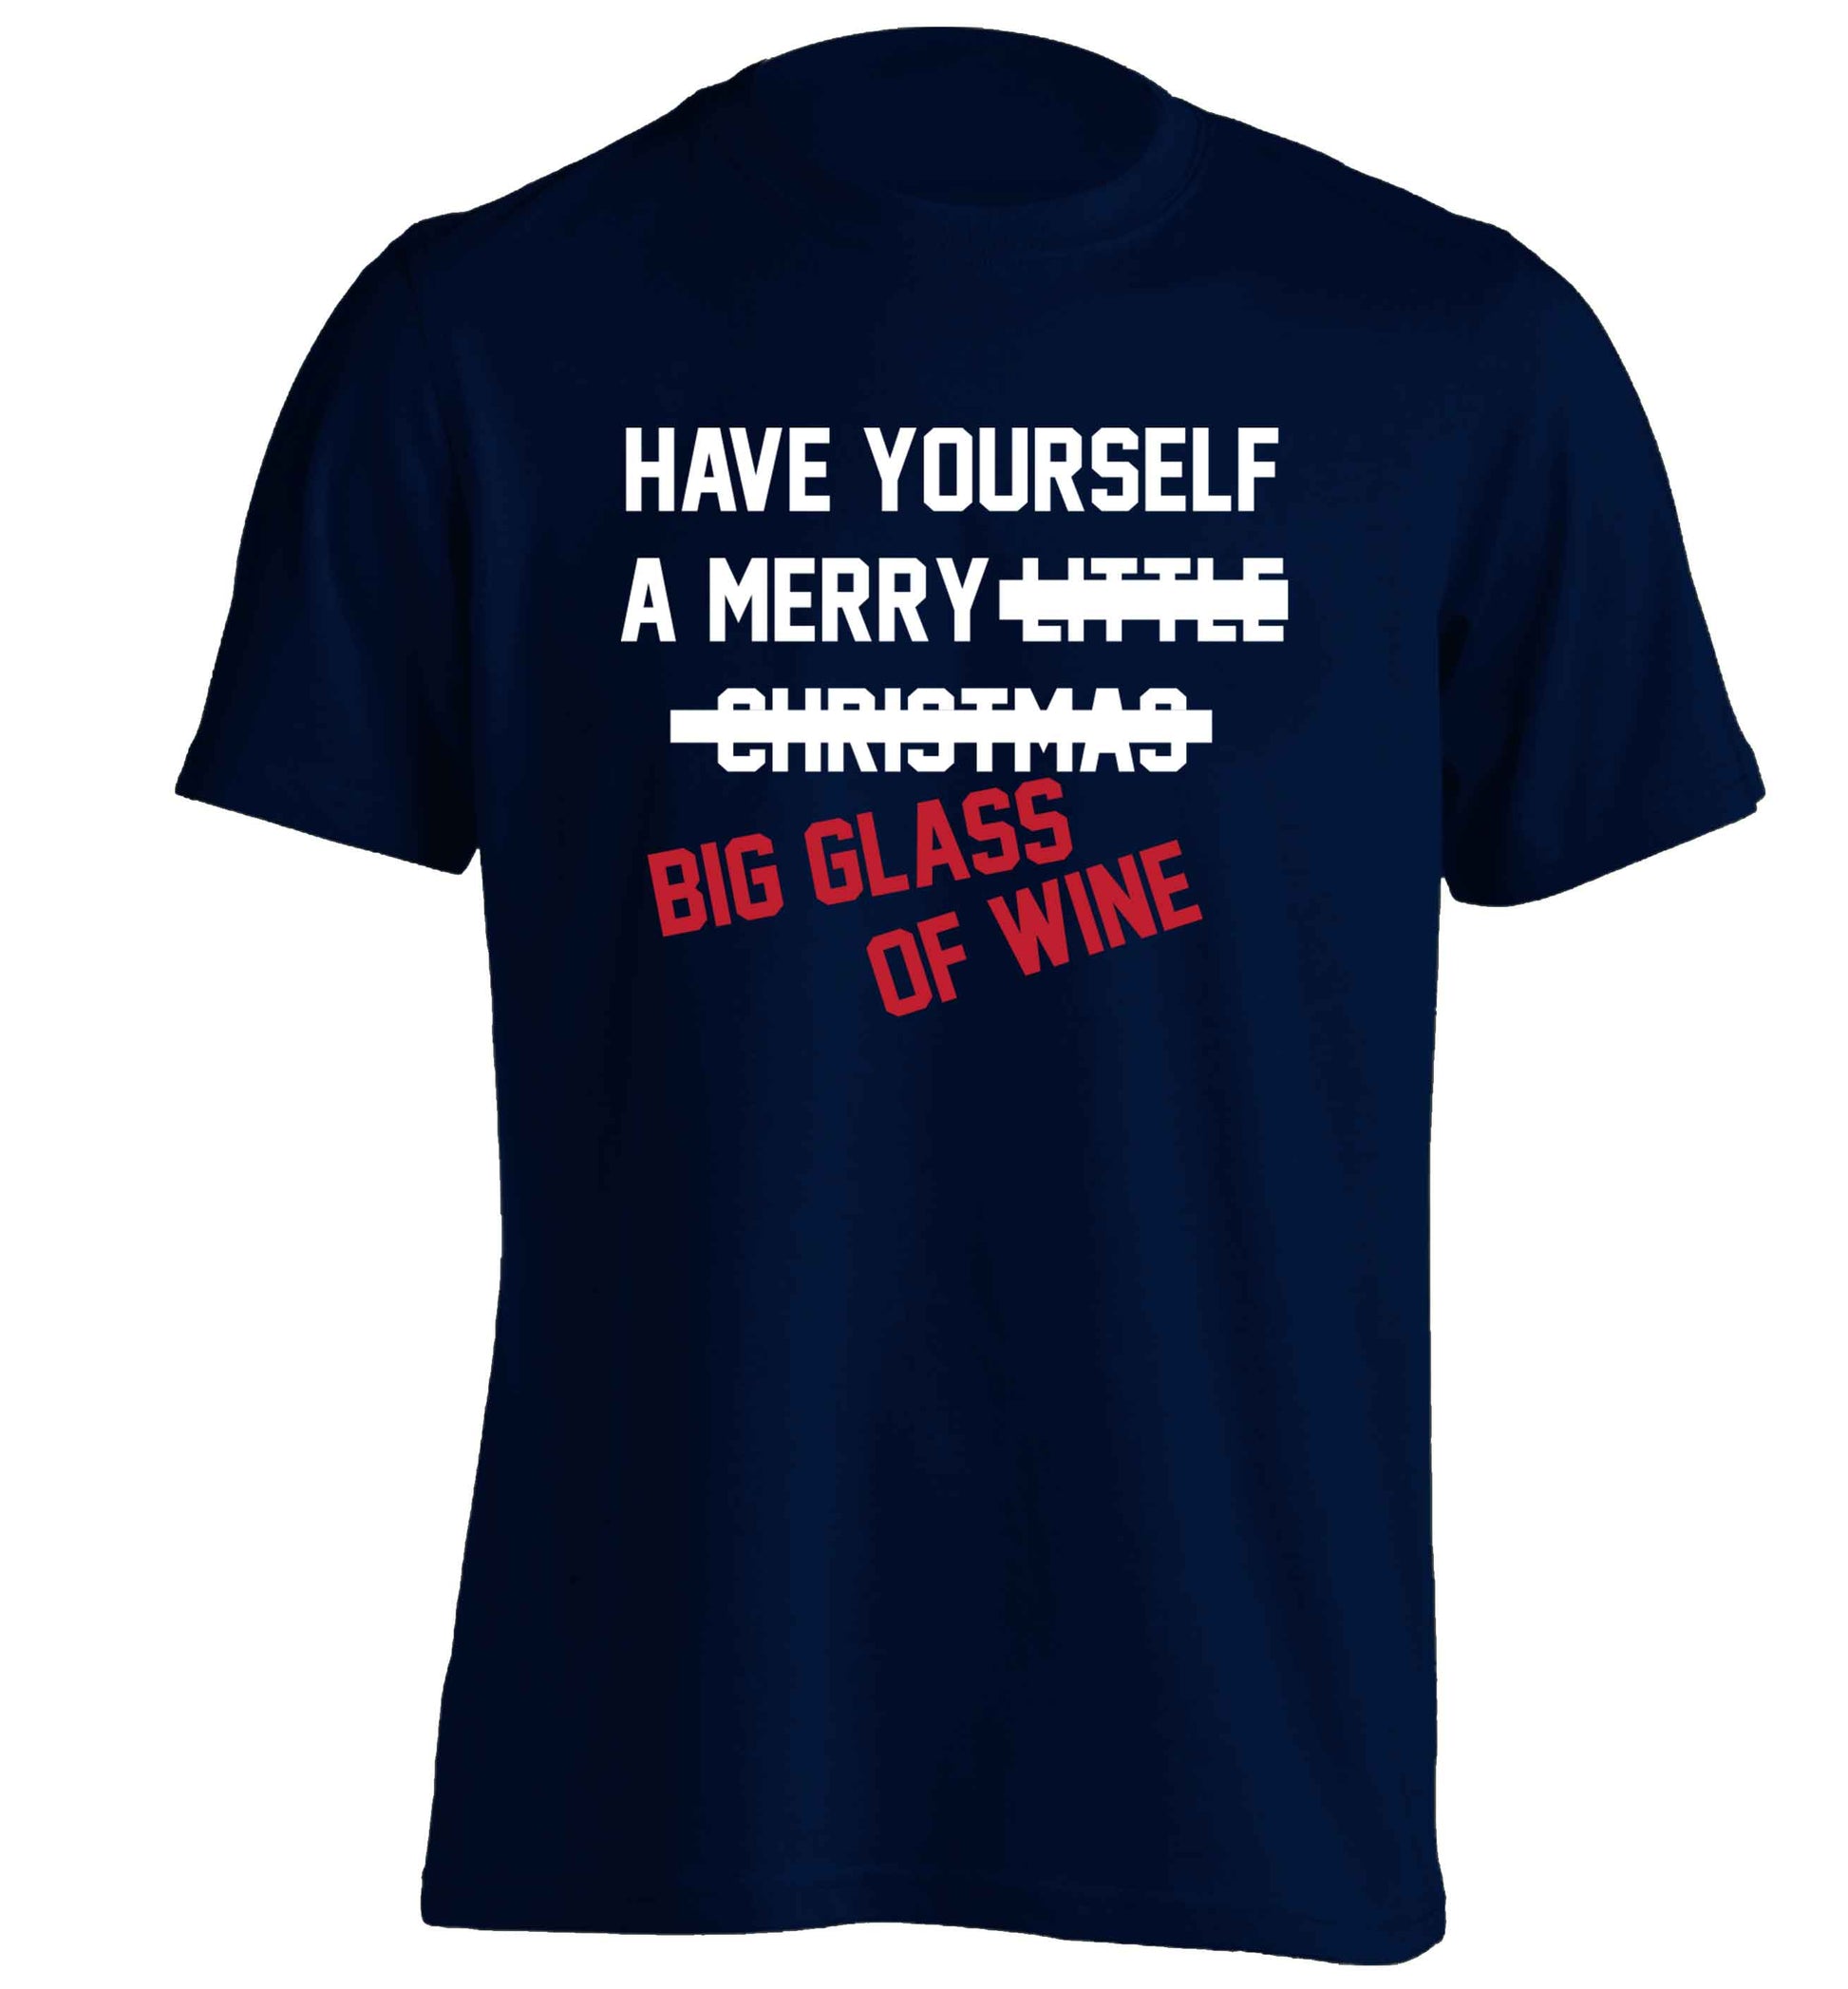 Have yourself a merry big glass of wine adults unisex navy Tshirt 2XL